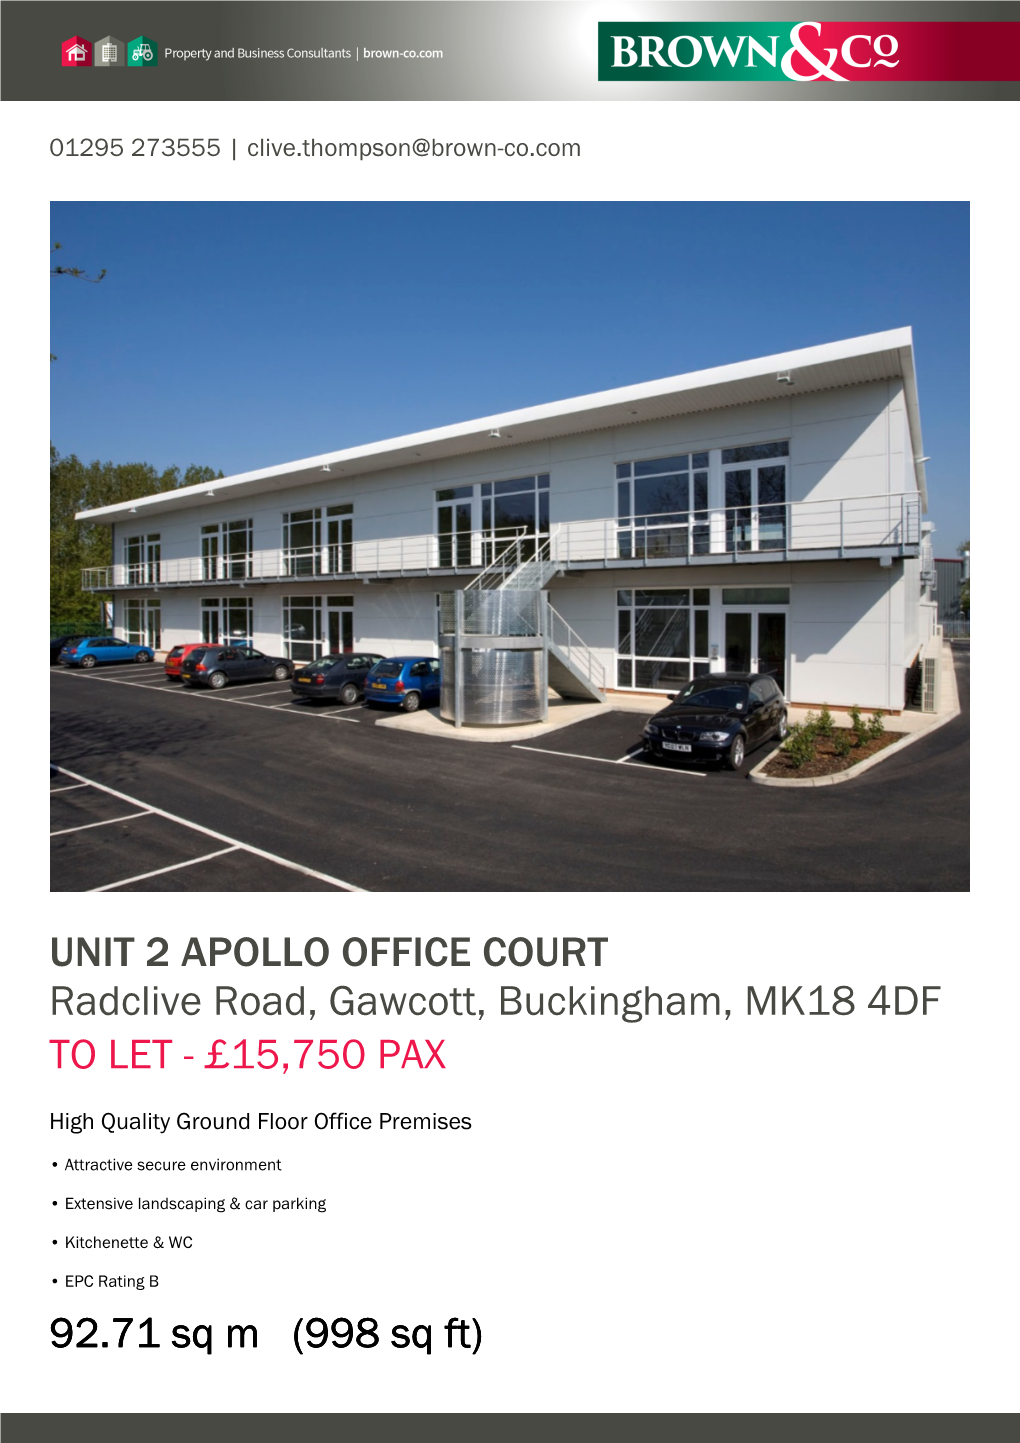 UNIT 2 APOLLO OFFICE COURT Radclive Road, Gawcott, Buckingham, MK18 4DF TO